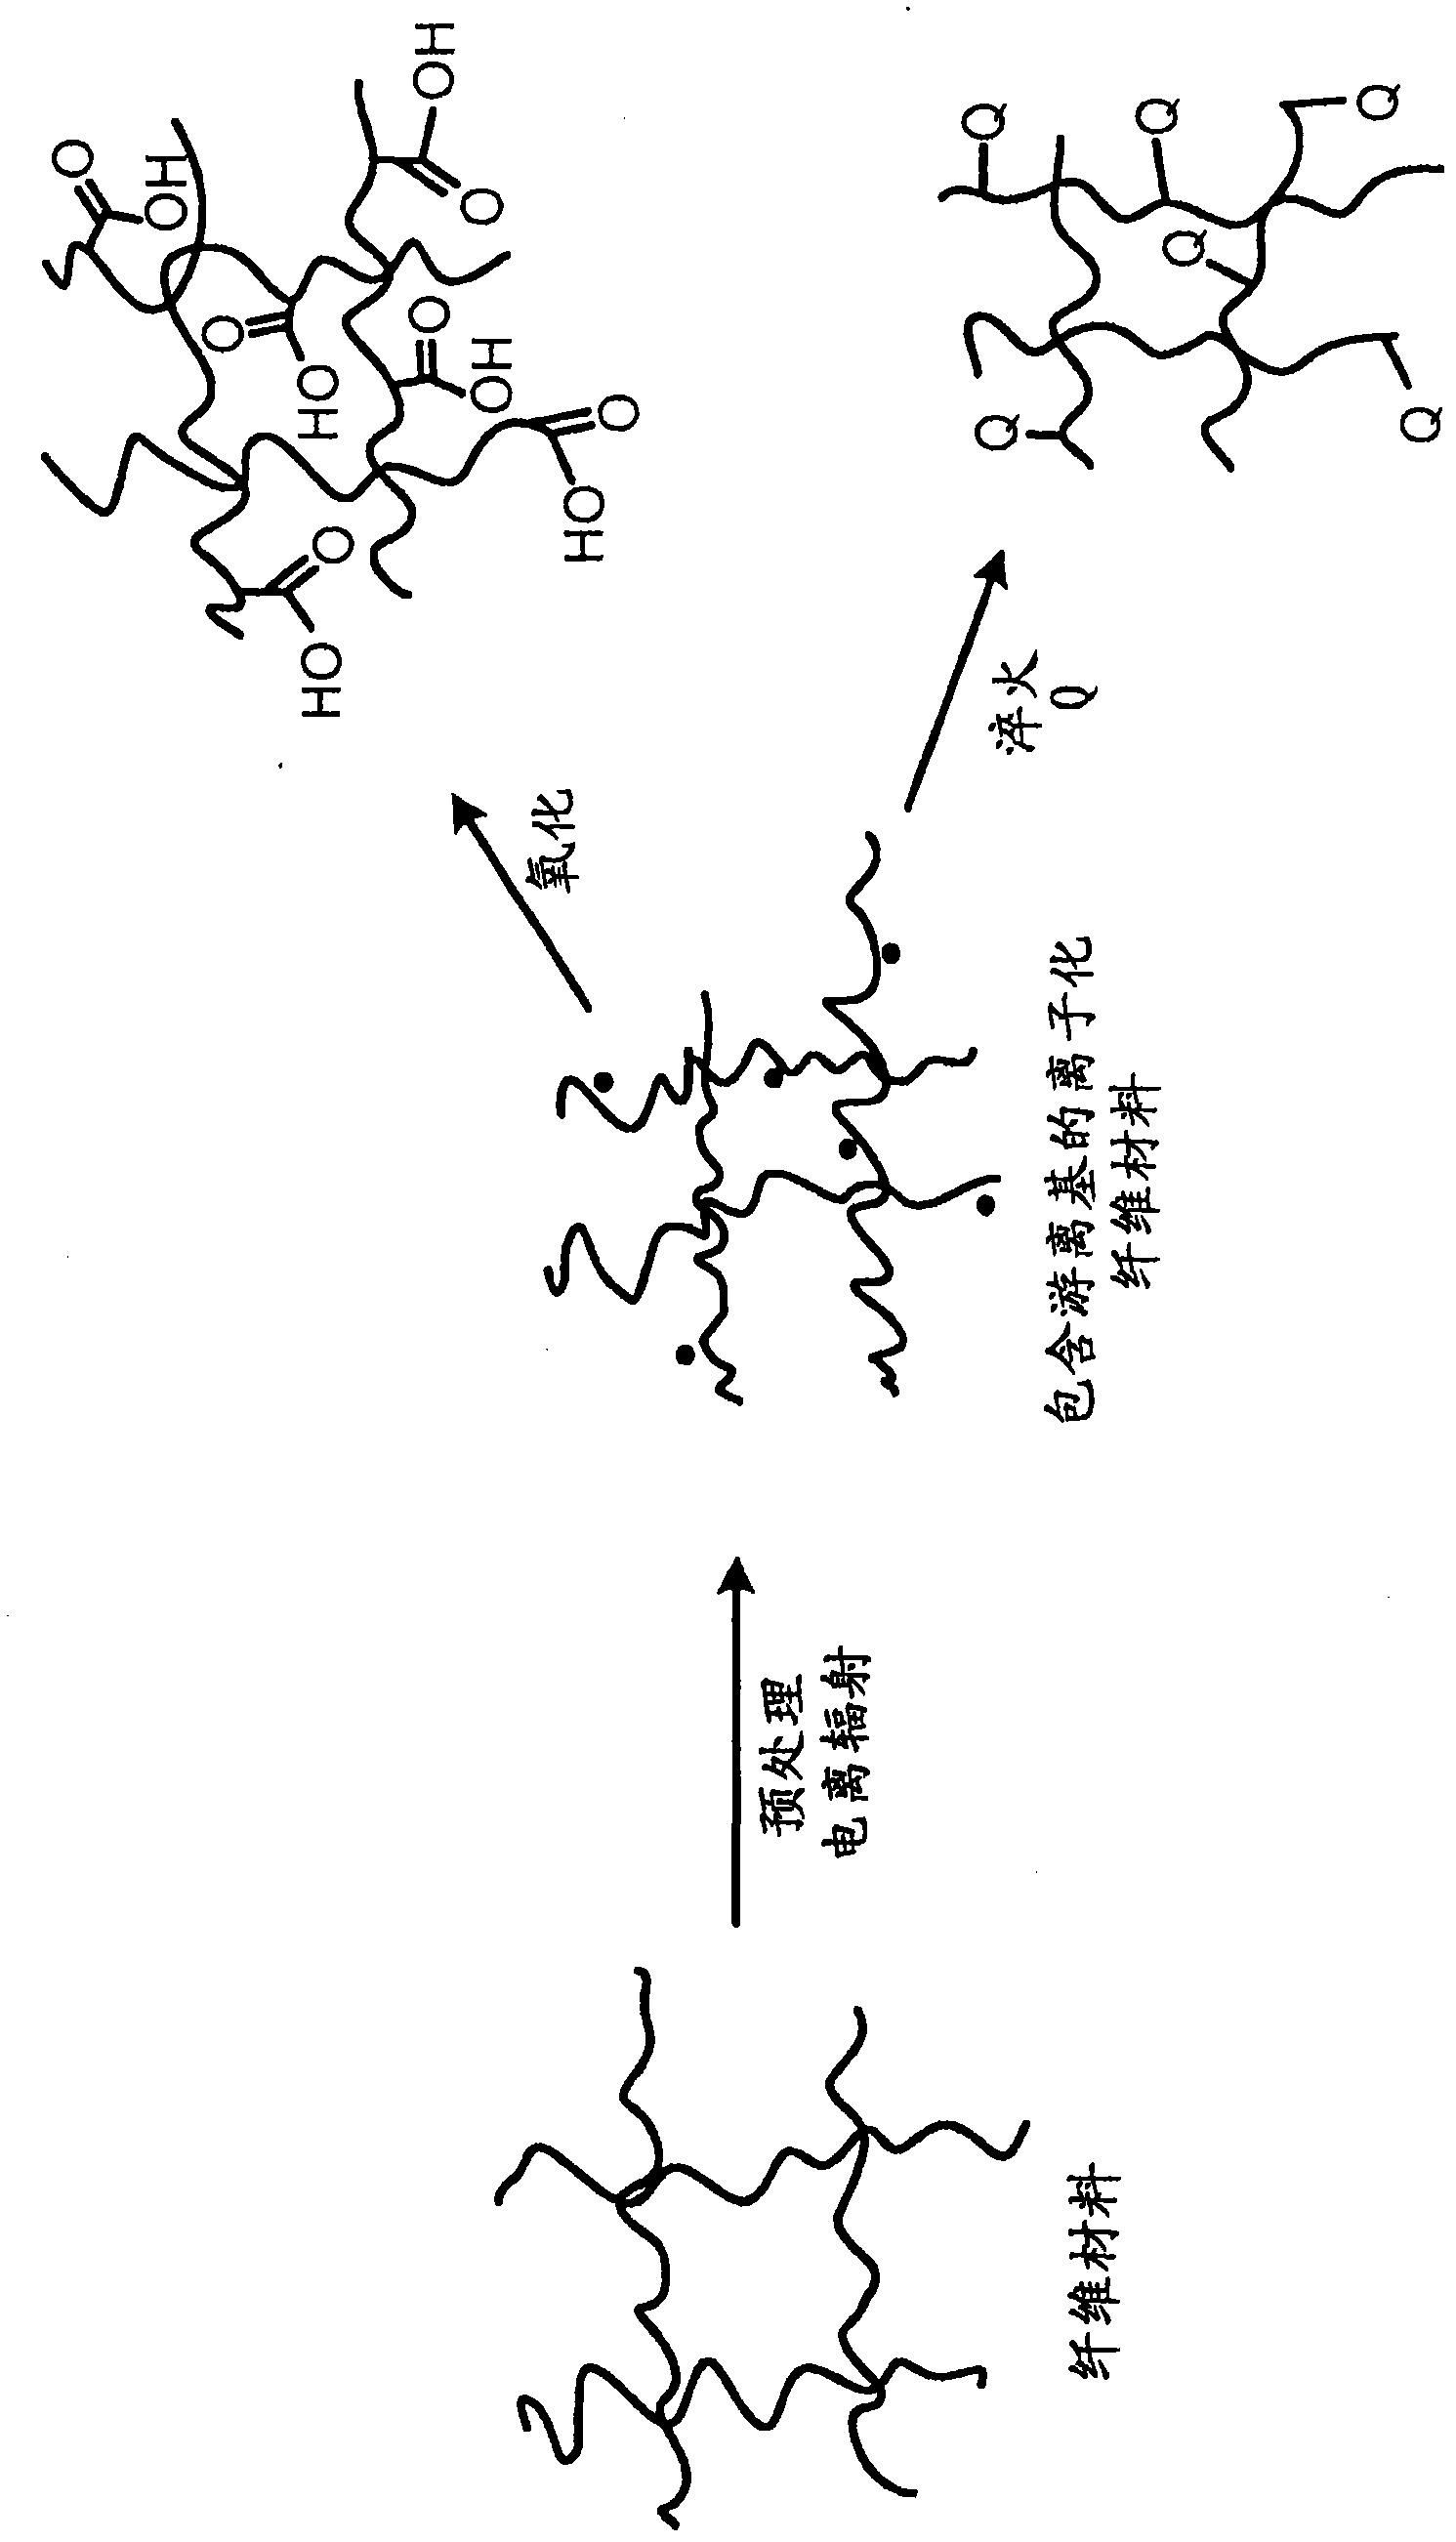 Cellulosic and lignocellulosic structural materials and methods and systems for manufacturing such materials